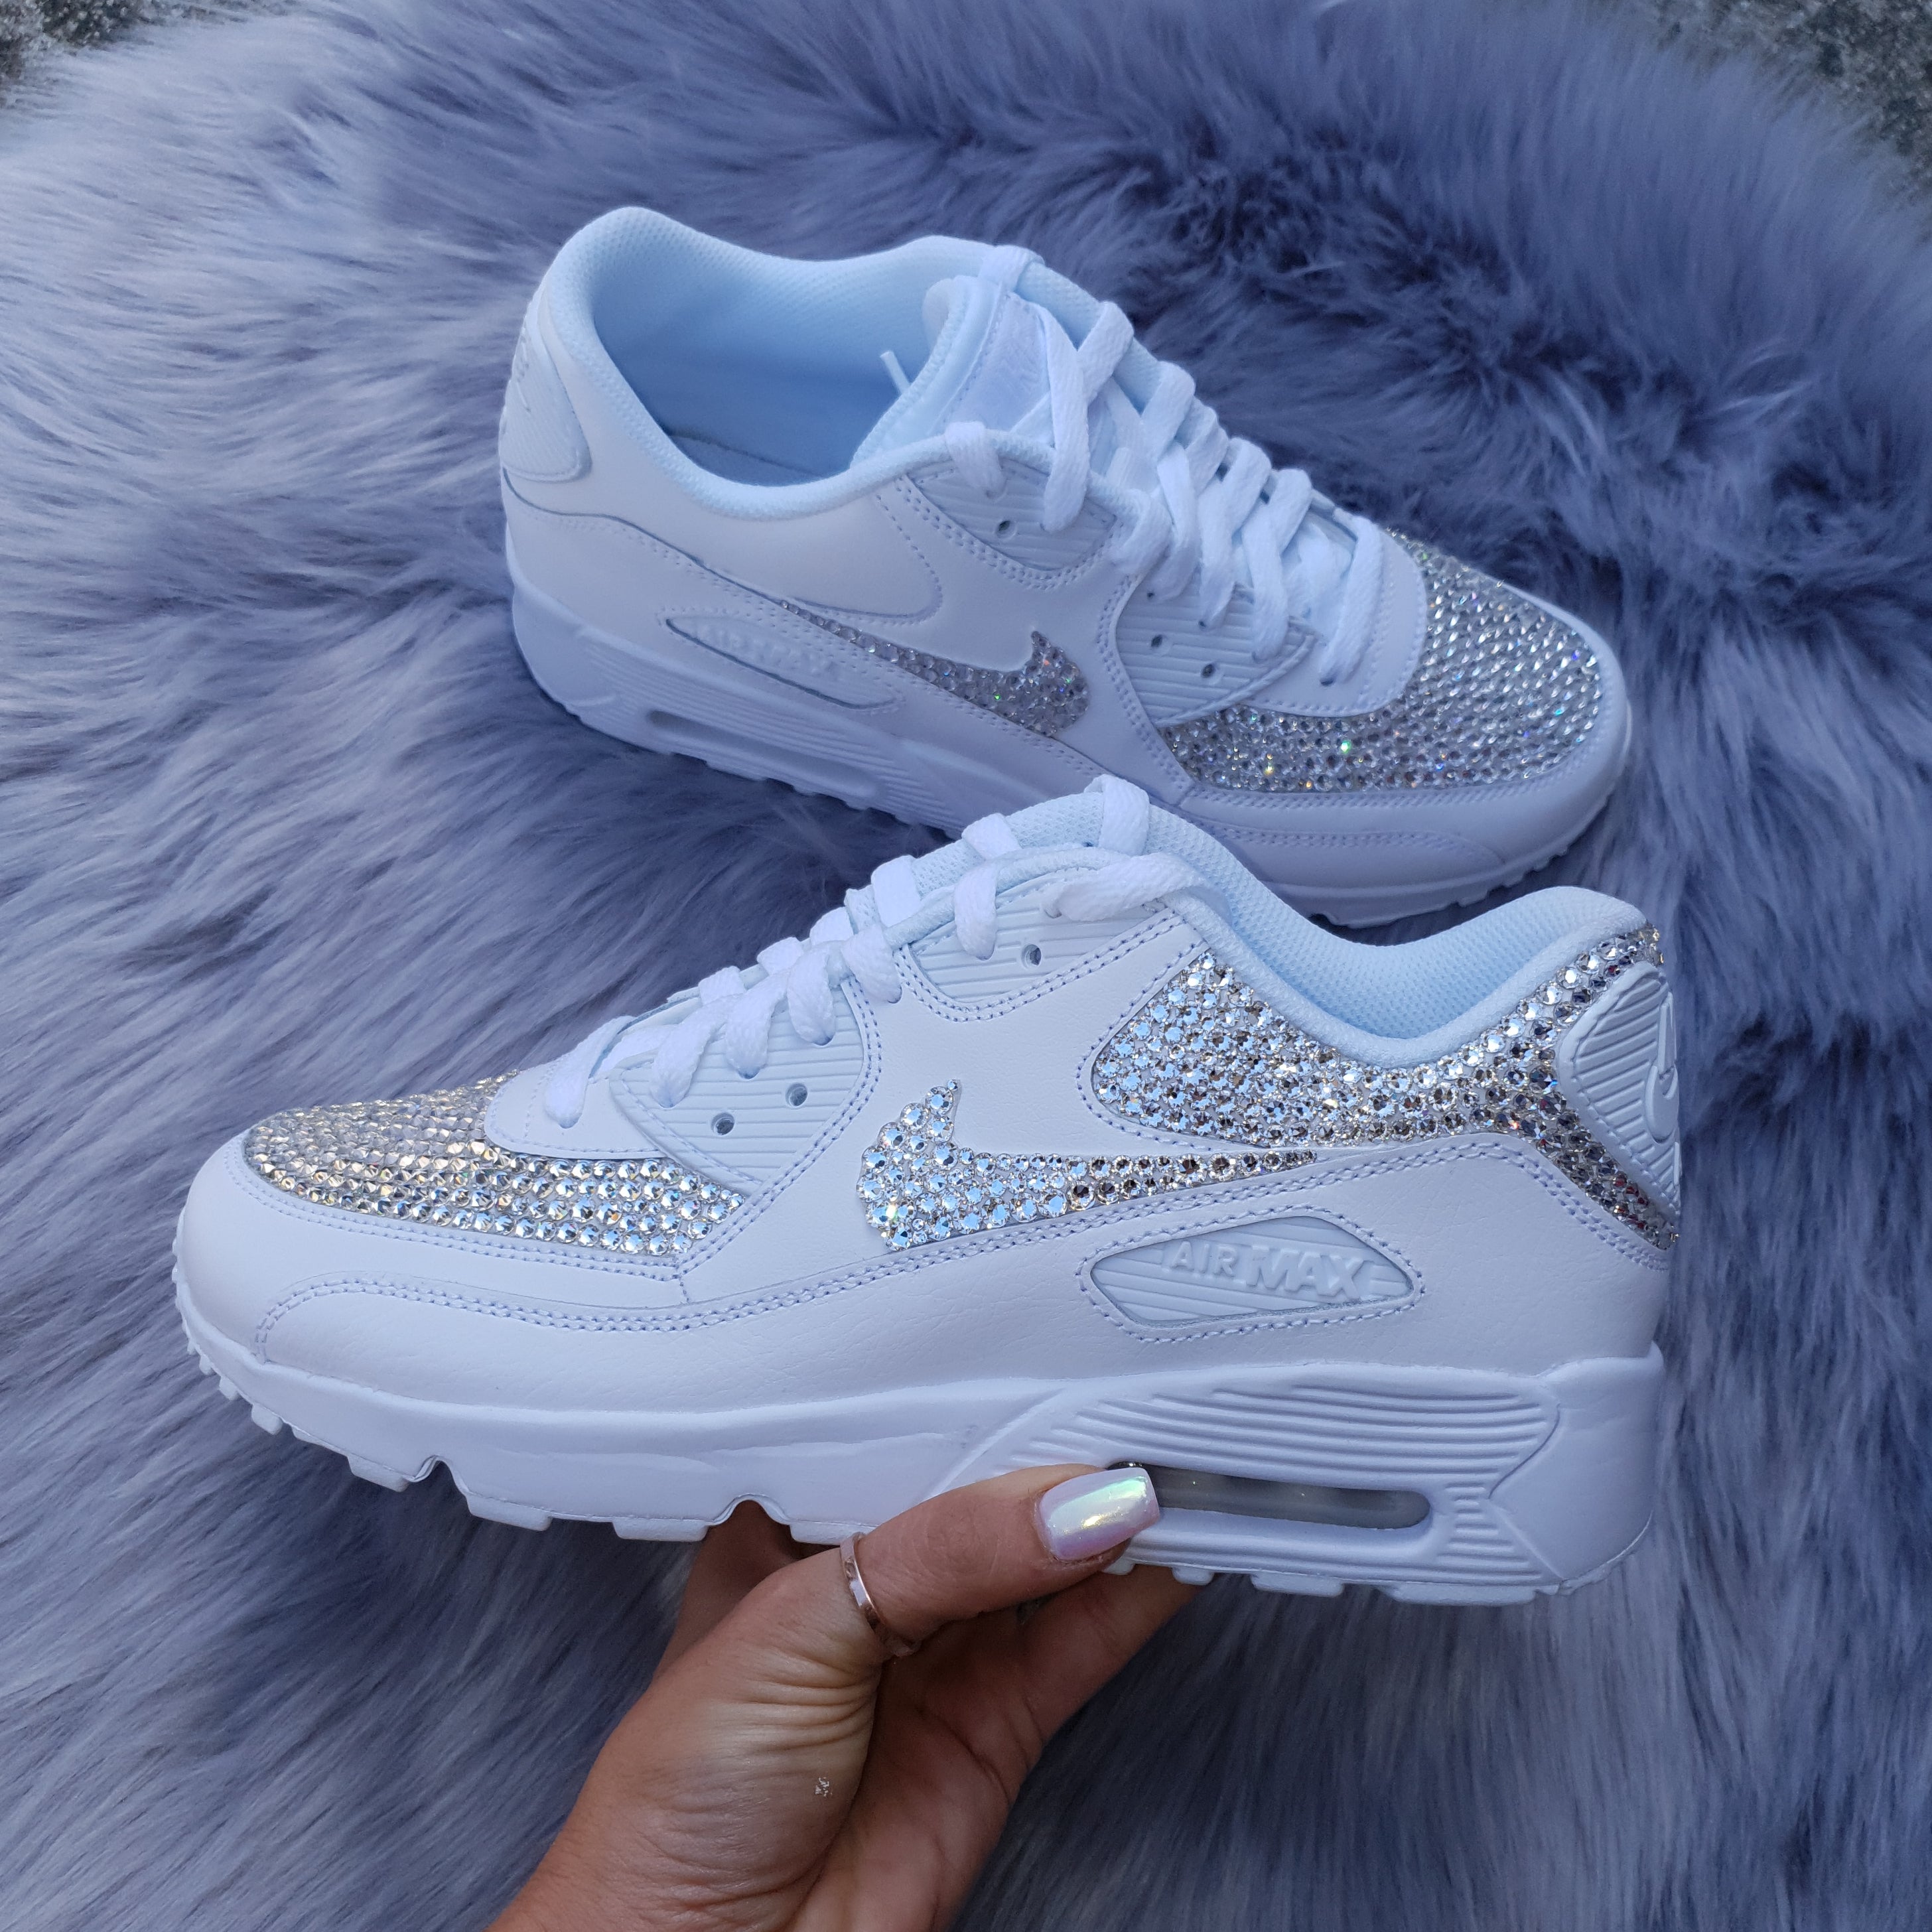 Swarovski Women's Air Max 90 Pink, White & Gray Sneakers Blinged with Authentic Swarovski Crystals Custom Bling Athletic Sneakers Shoes